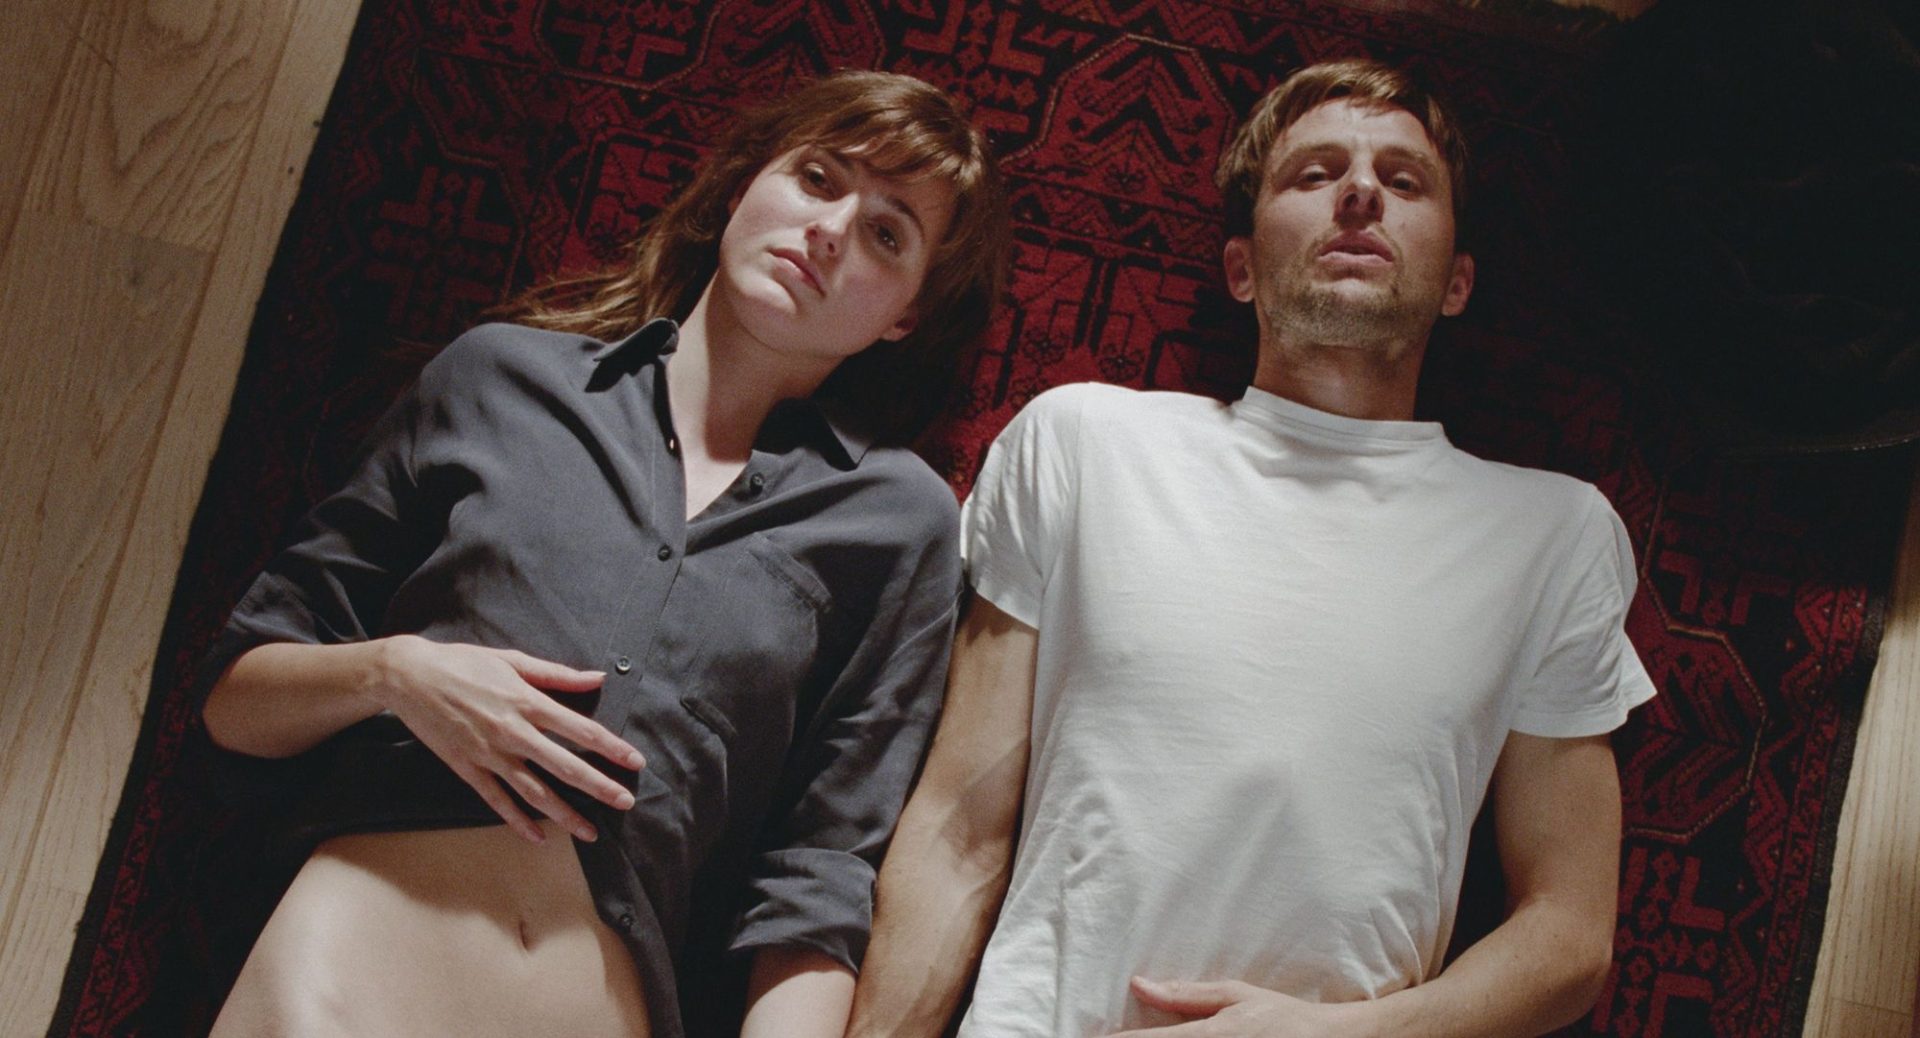 The Worst Person in the World recensione film Joachim Trier [Cannes 74]